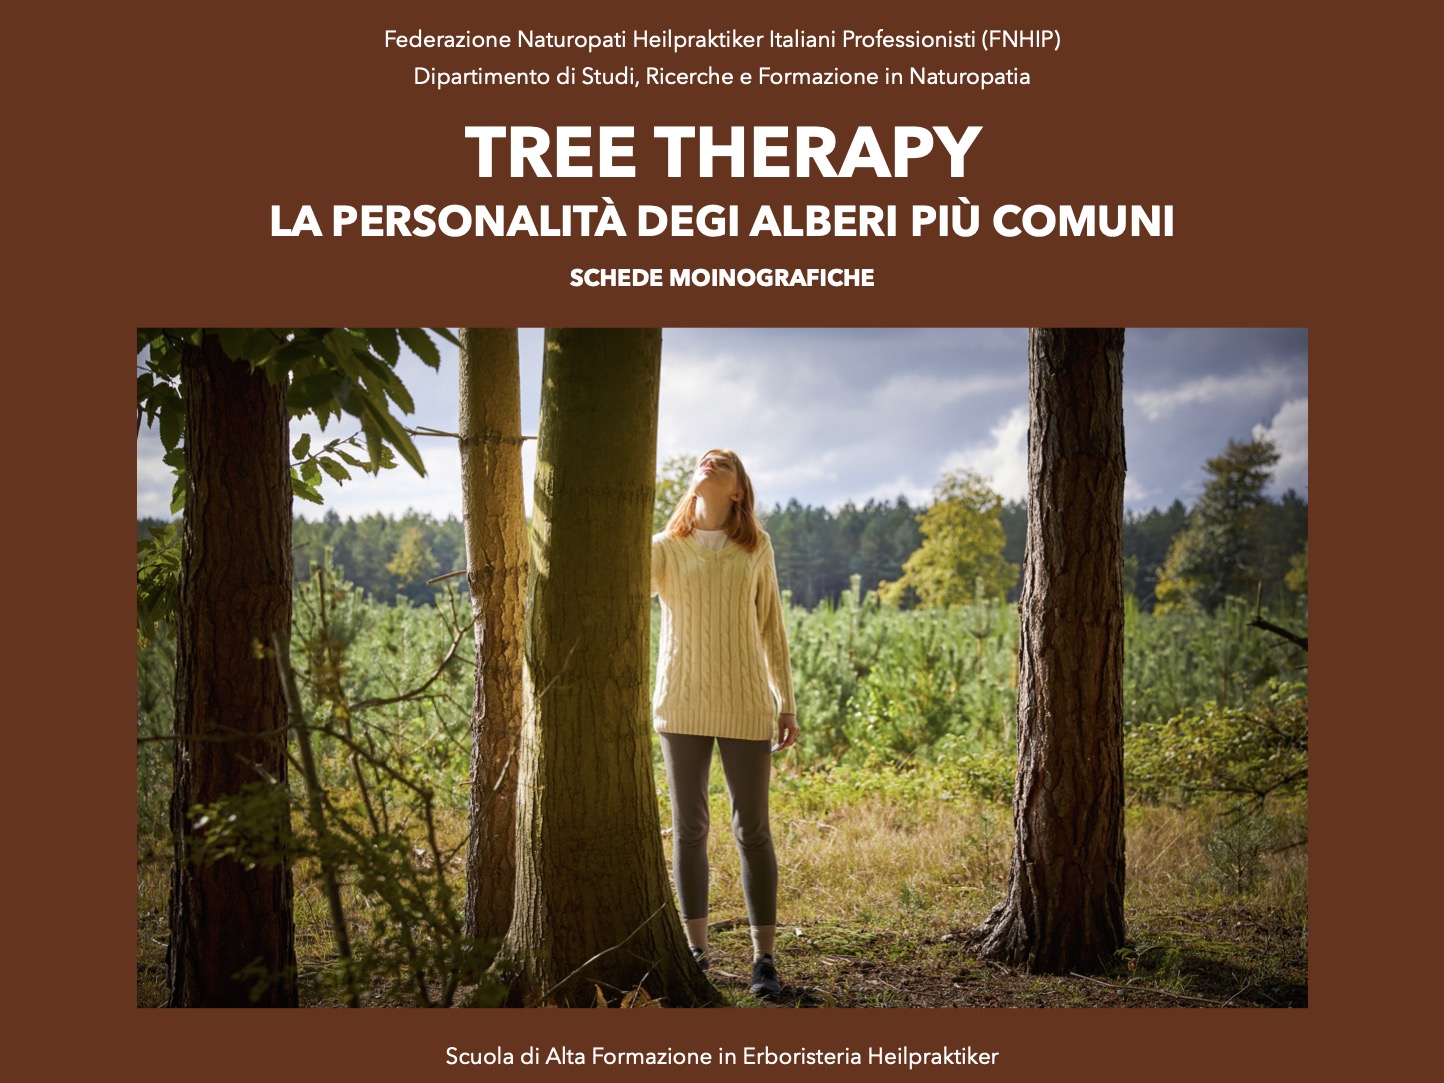 Tree therapy